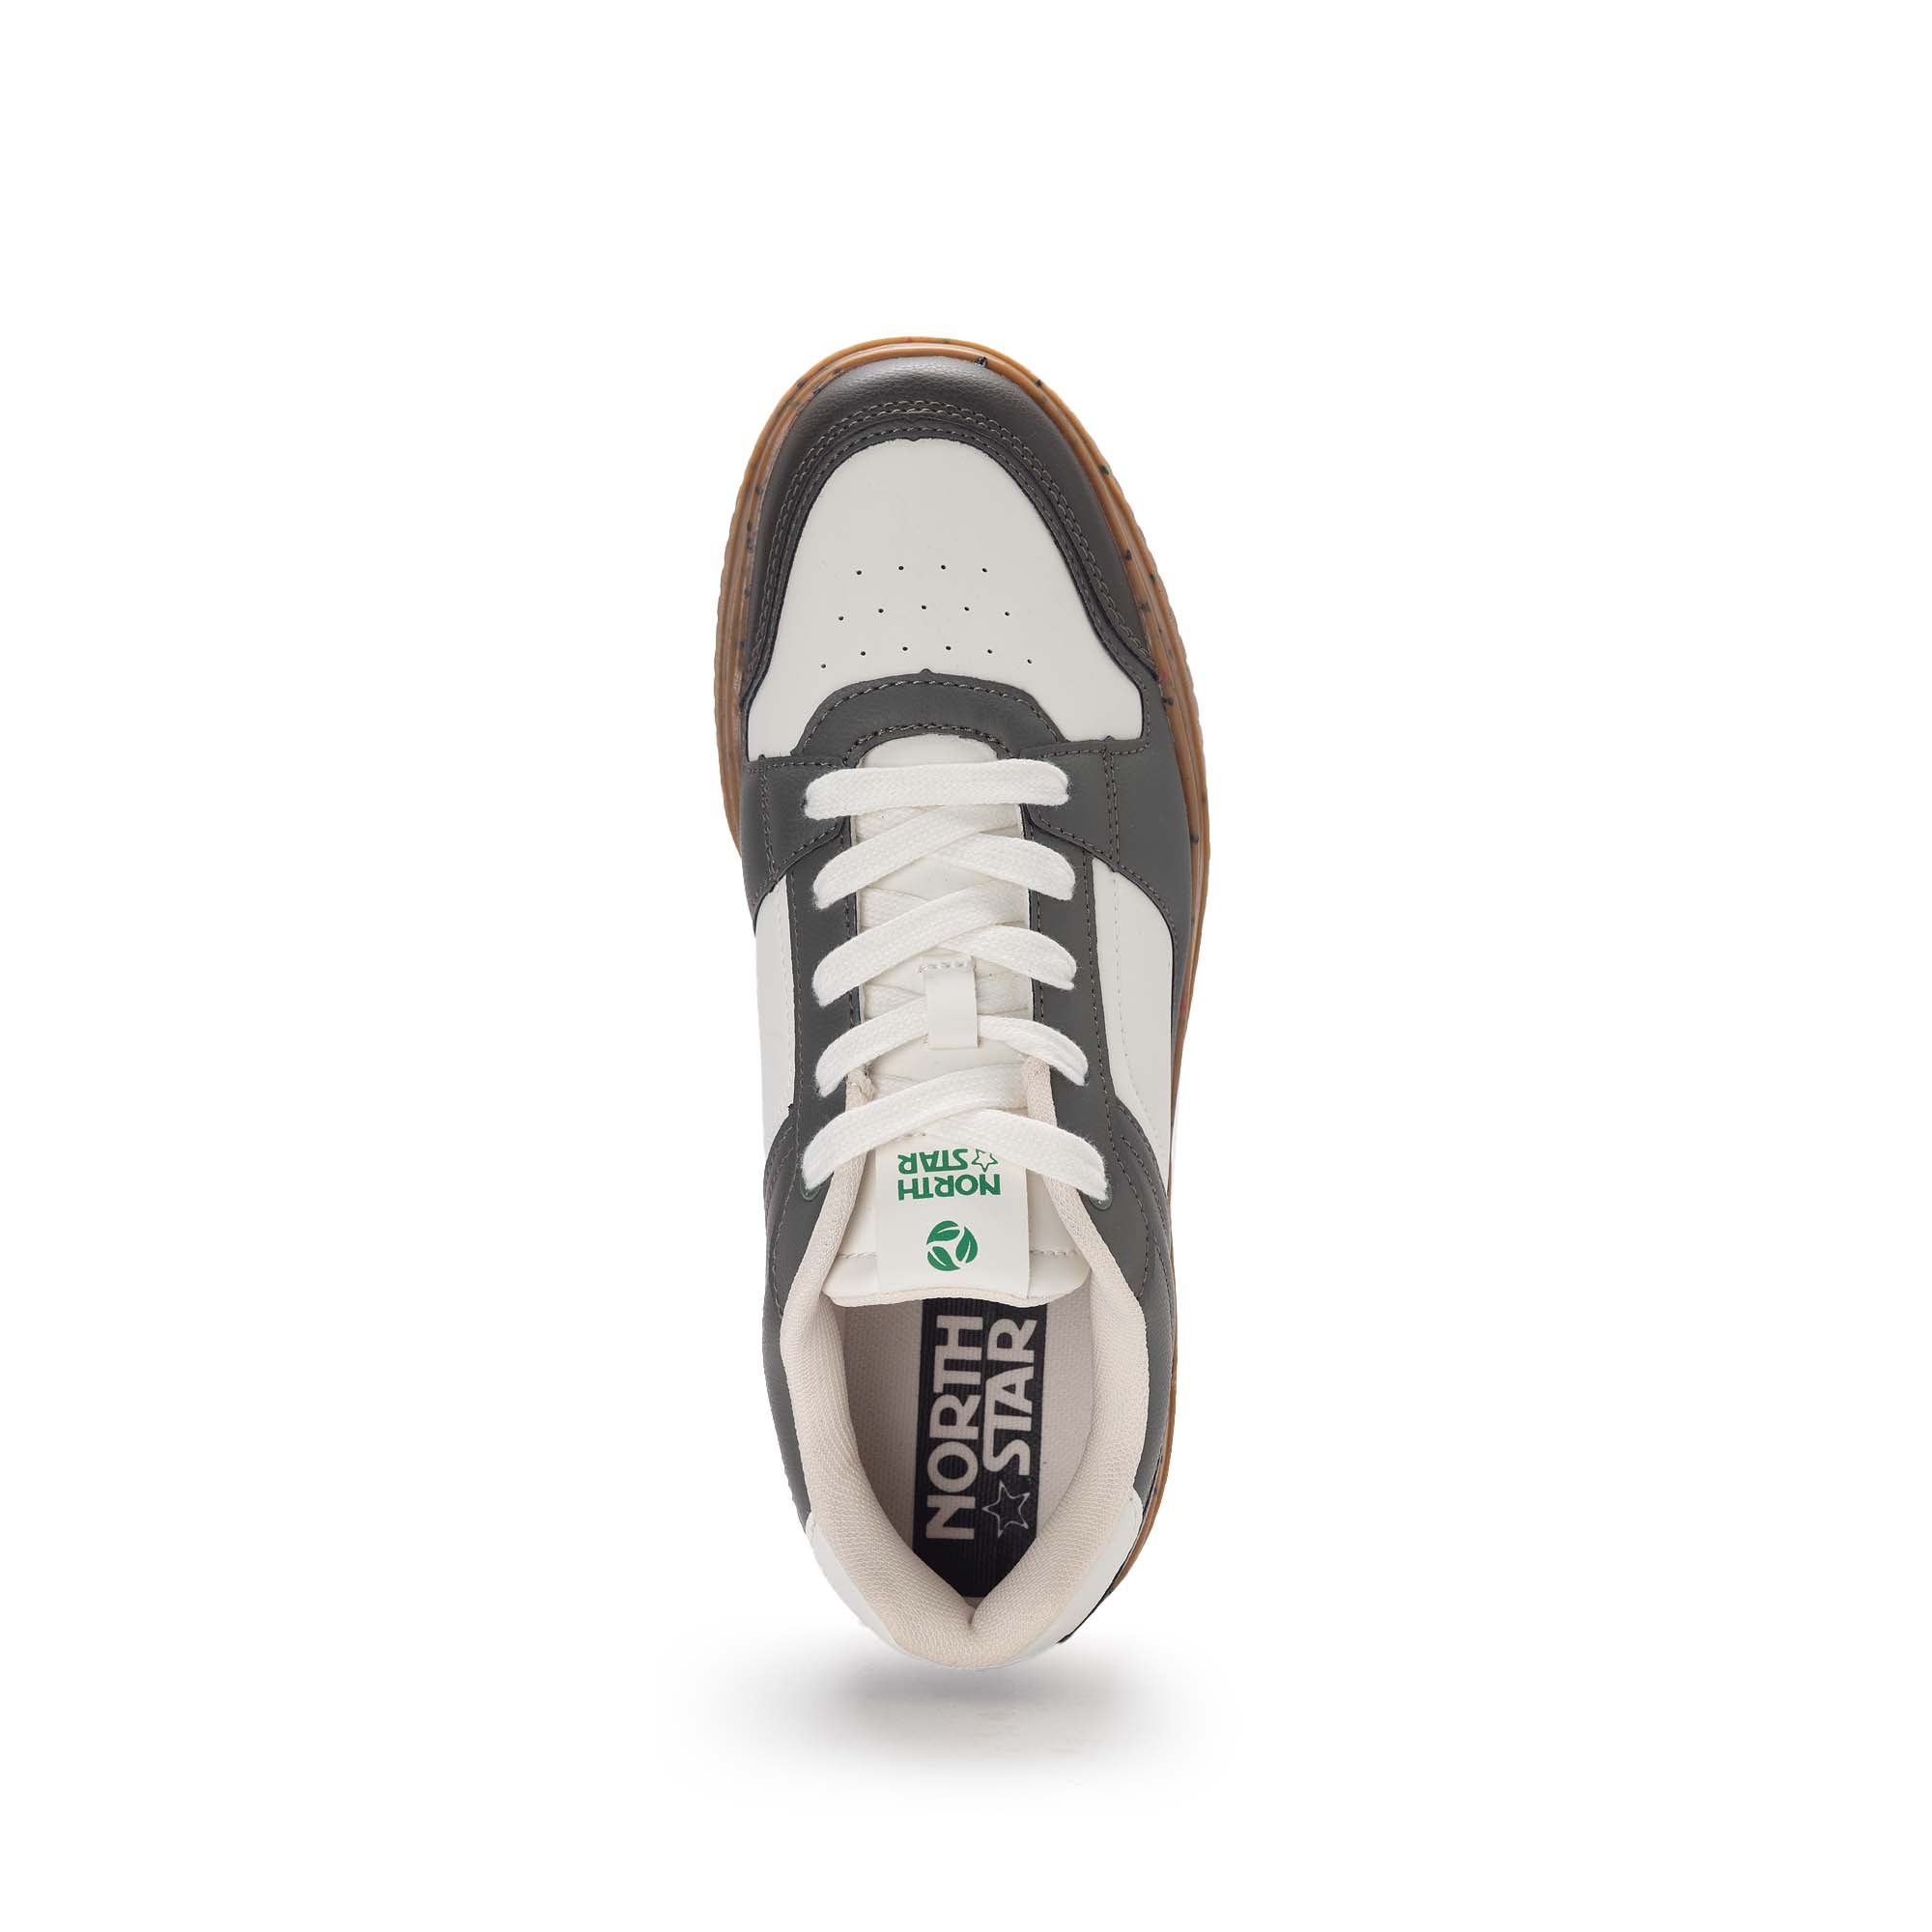 2023 Tokuten Army Tiger Cloudmonster Shoes Sail  Green/Navy/Gum/White/Black/Beige Designer Sneakers For Men And Women Low  Fashion Classic Sports Trainers From Superpowerstore, $26.27 | DHgate.Com